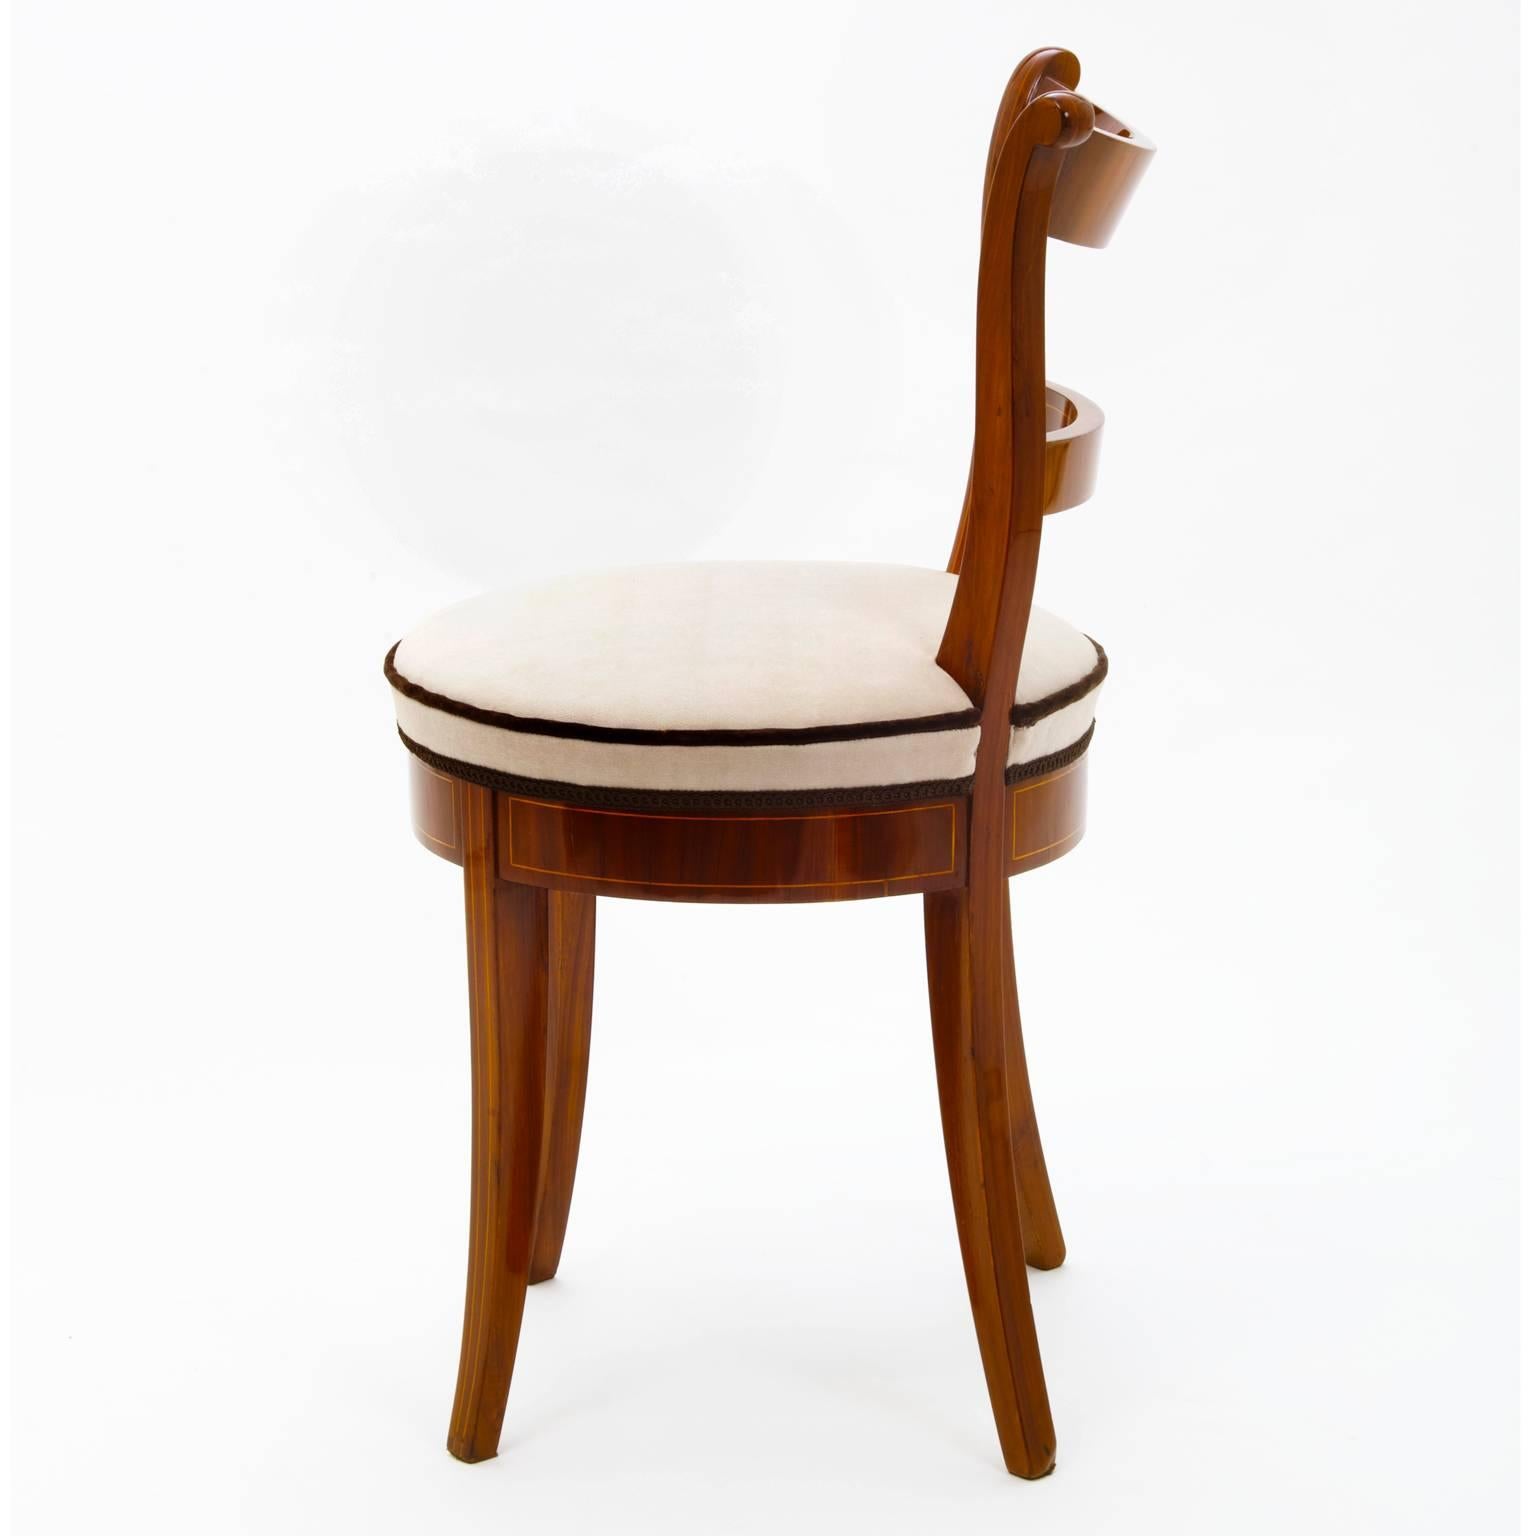 Four delightful lady chairs made out of plum wood, with a round seat and slightly flared legs. The backrest is curved and decorated with fine maple thread inlays. The seats are newly upholstered.